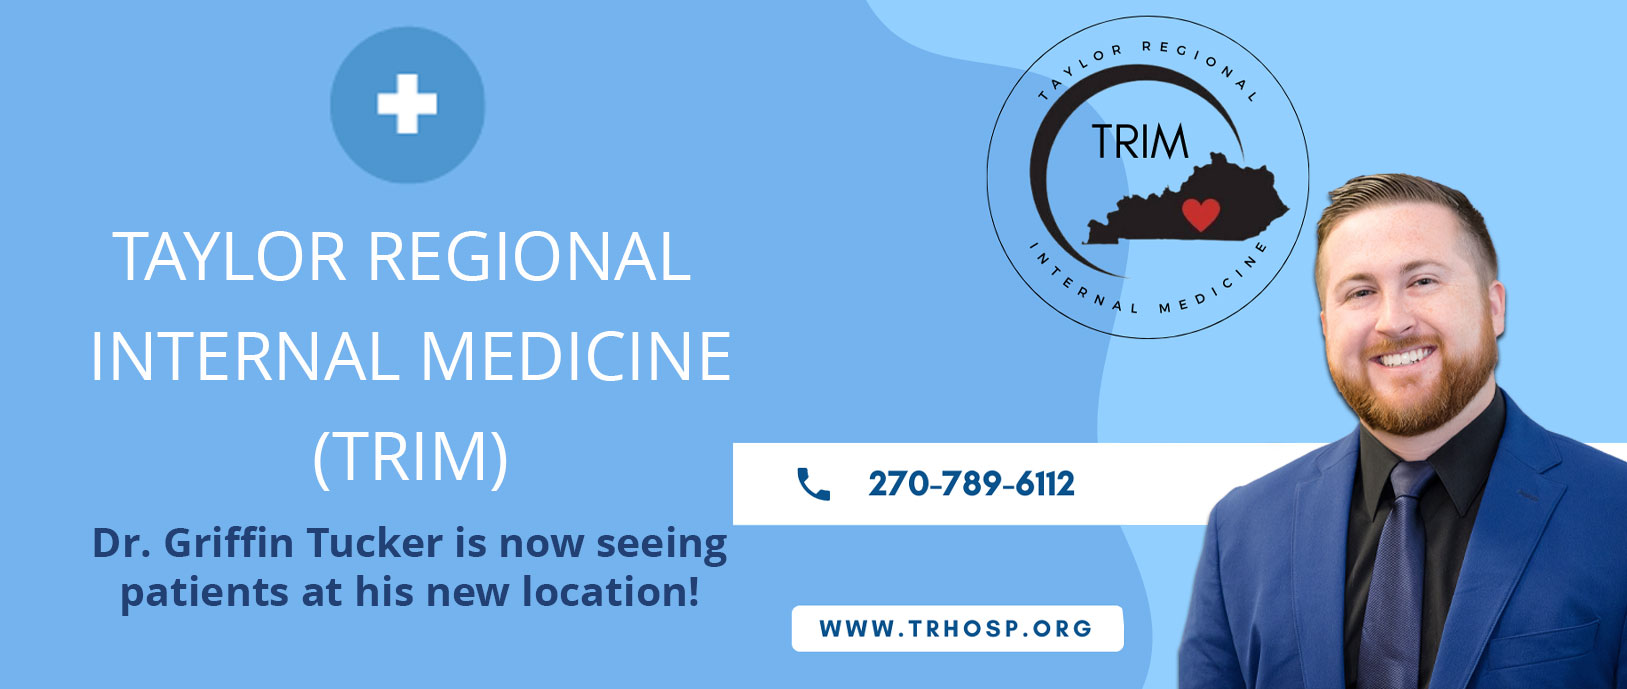 Taylor Regional Internal Medicine
(TRIM)

Dr. Griffin Tucker is now seeing patients at his new location!

270-789-6112